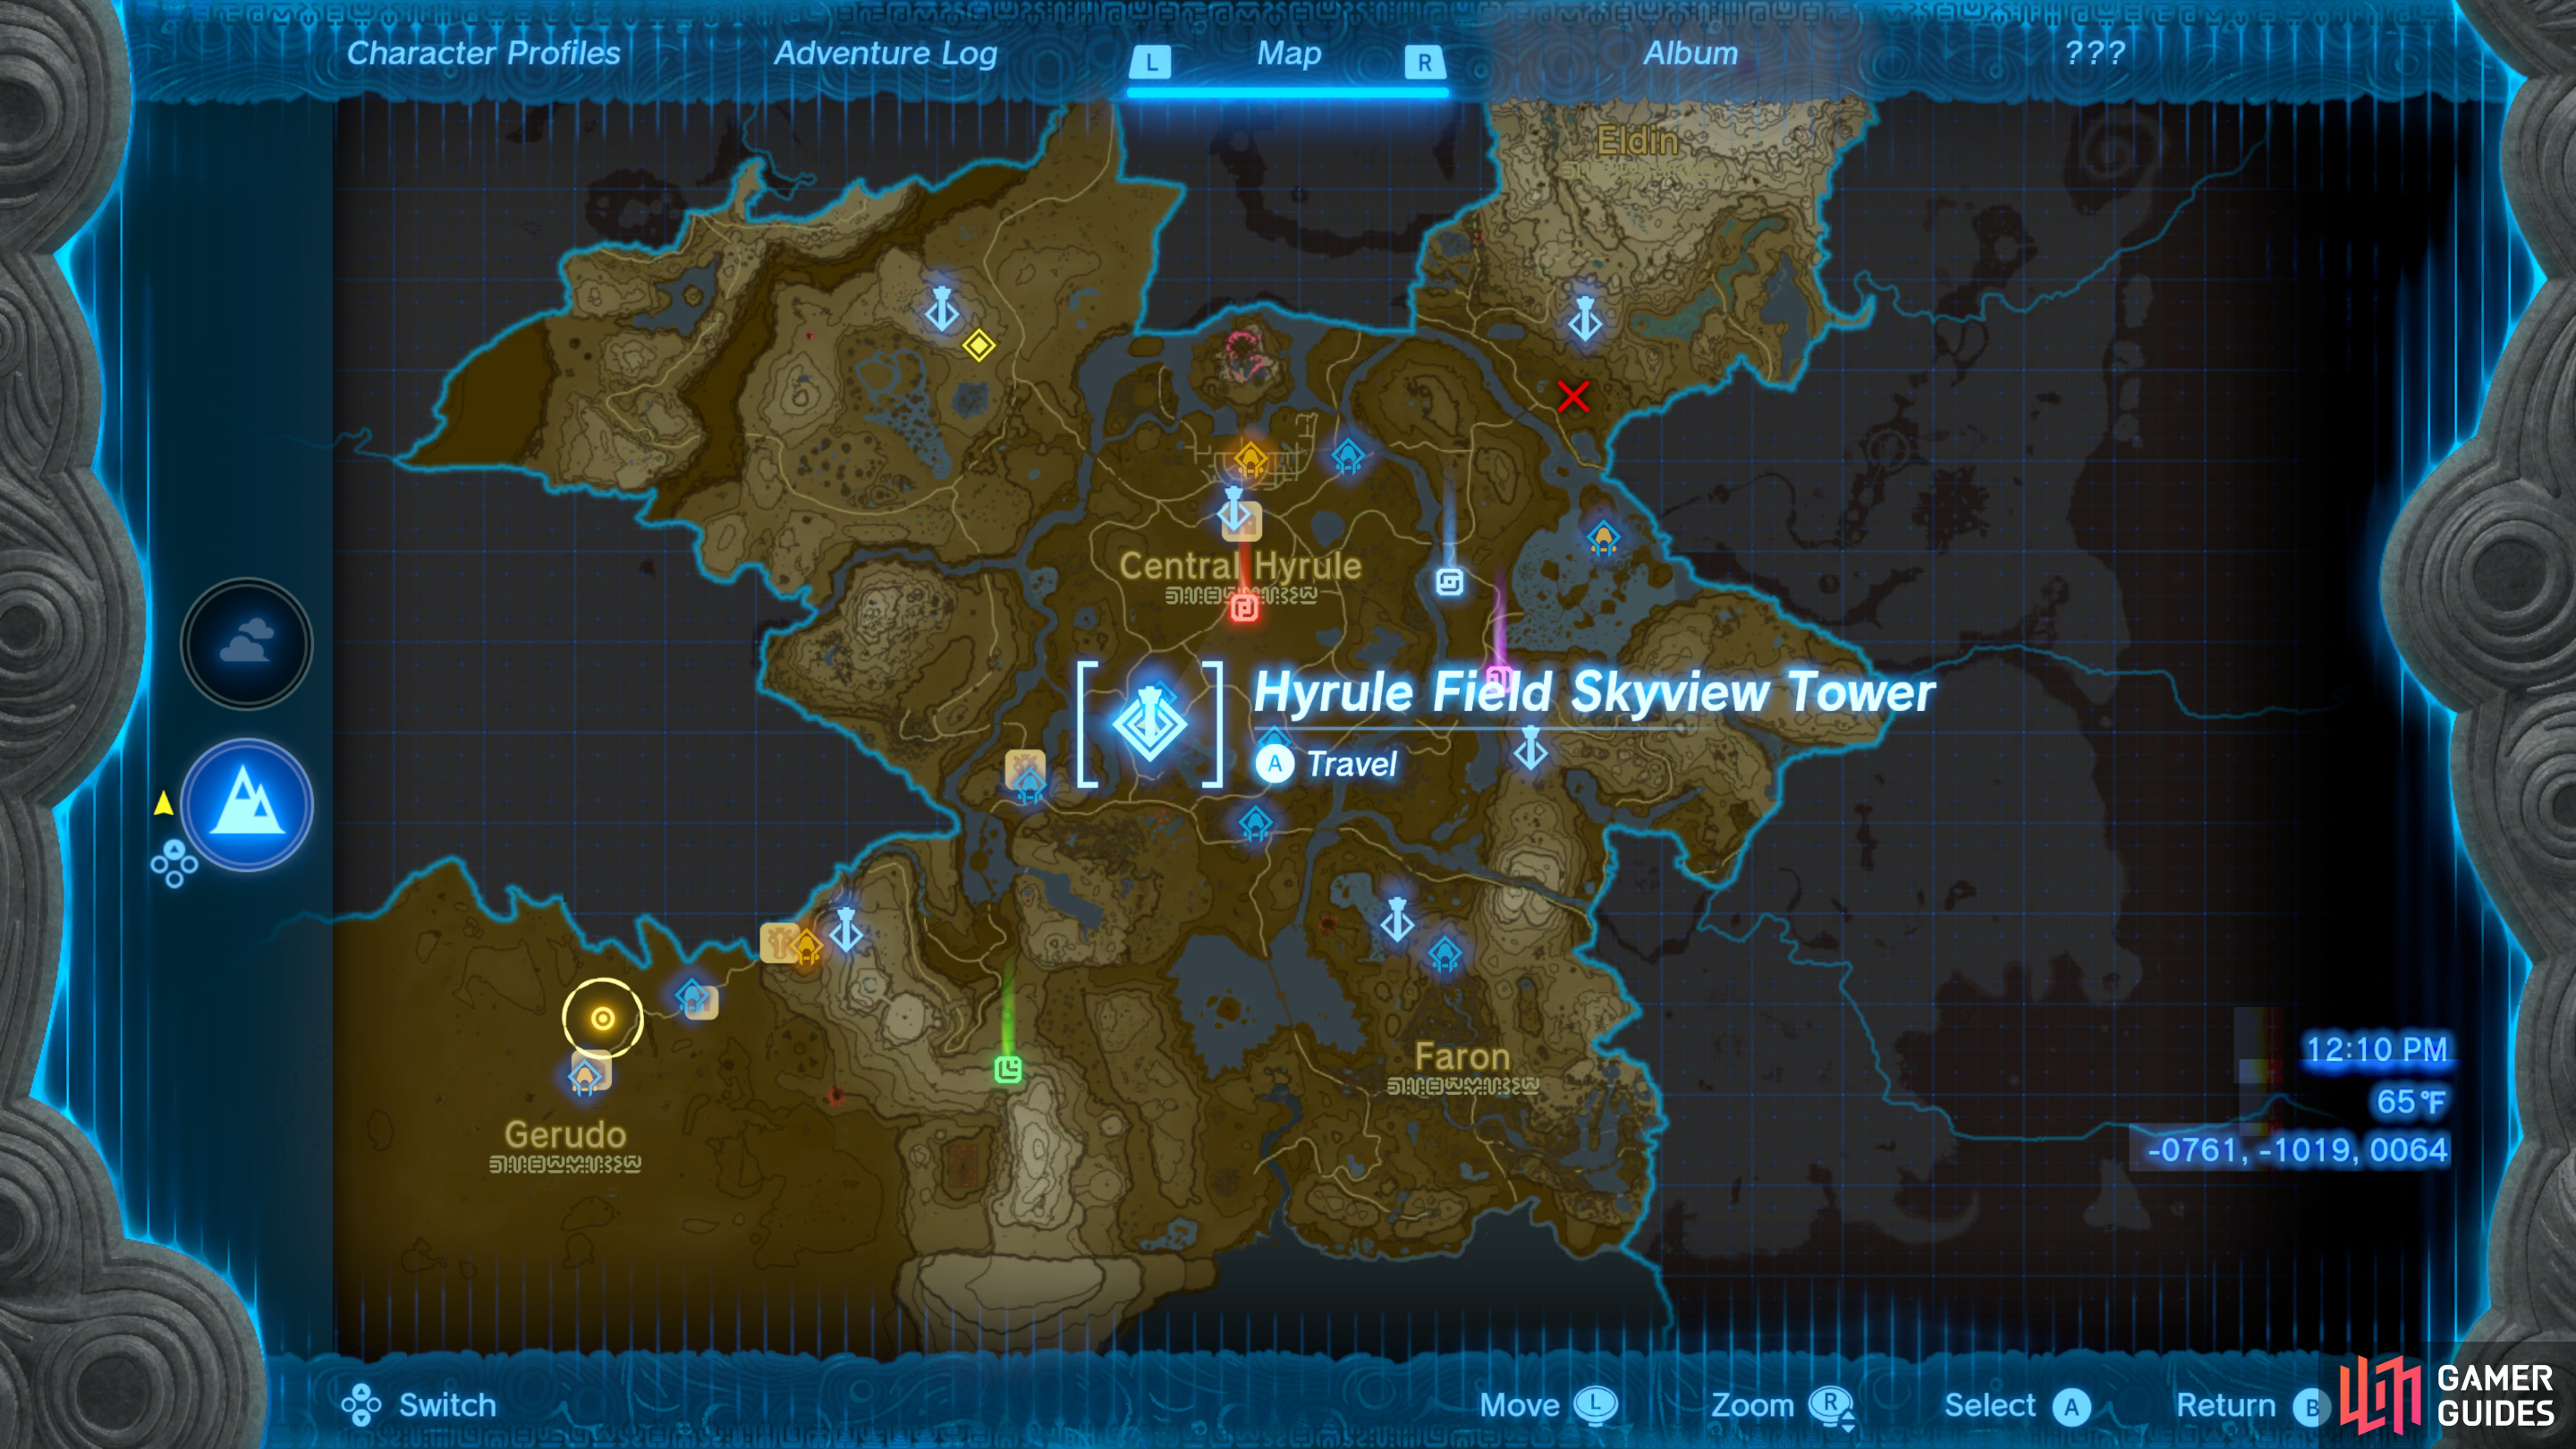 Hyrule Field Skyview Tower is along the southwestern edge of Central Hyrule.